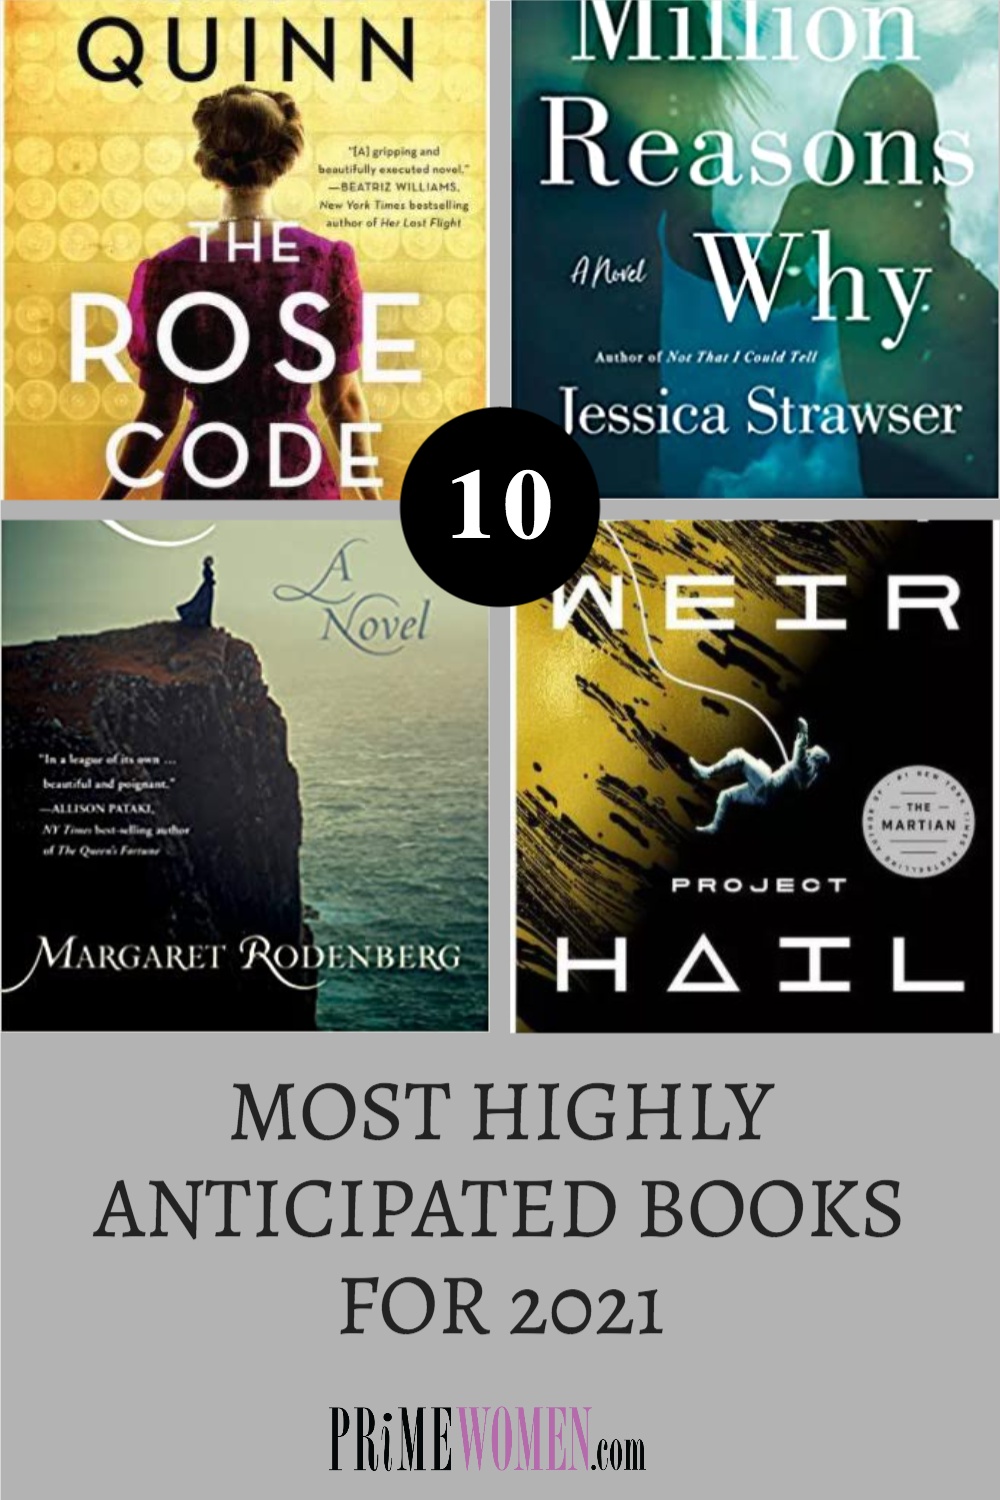 The 10 Most Highly Anticipated Books for 2021